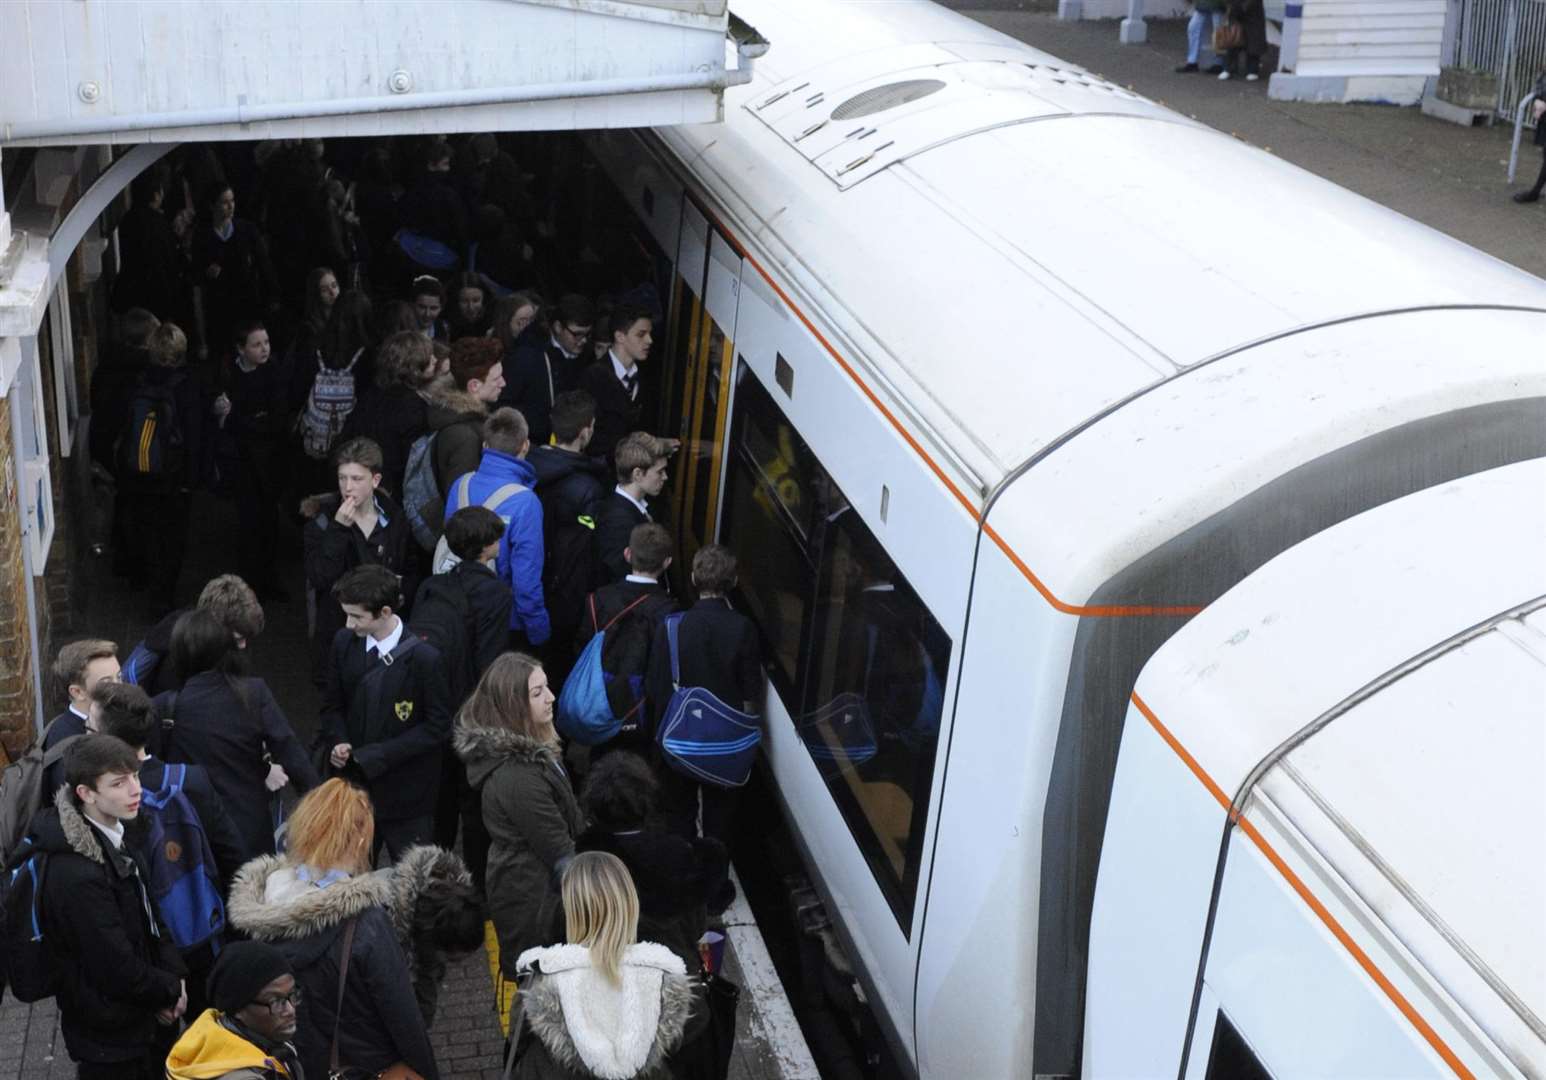 Rail travellers will face an average 3.1% increase in fares next year